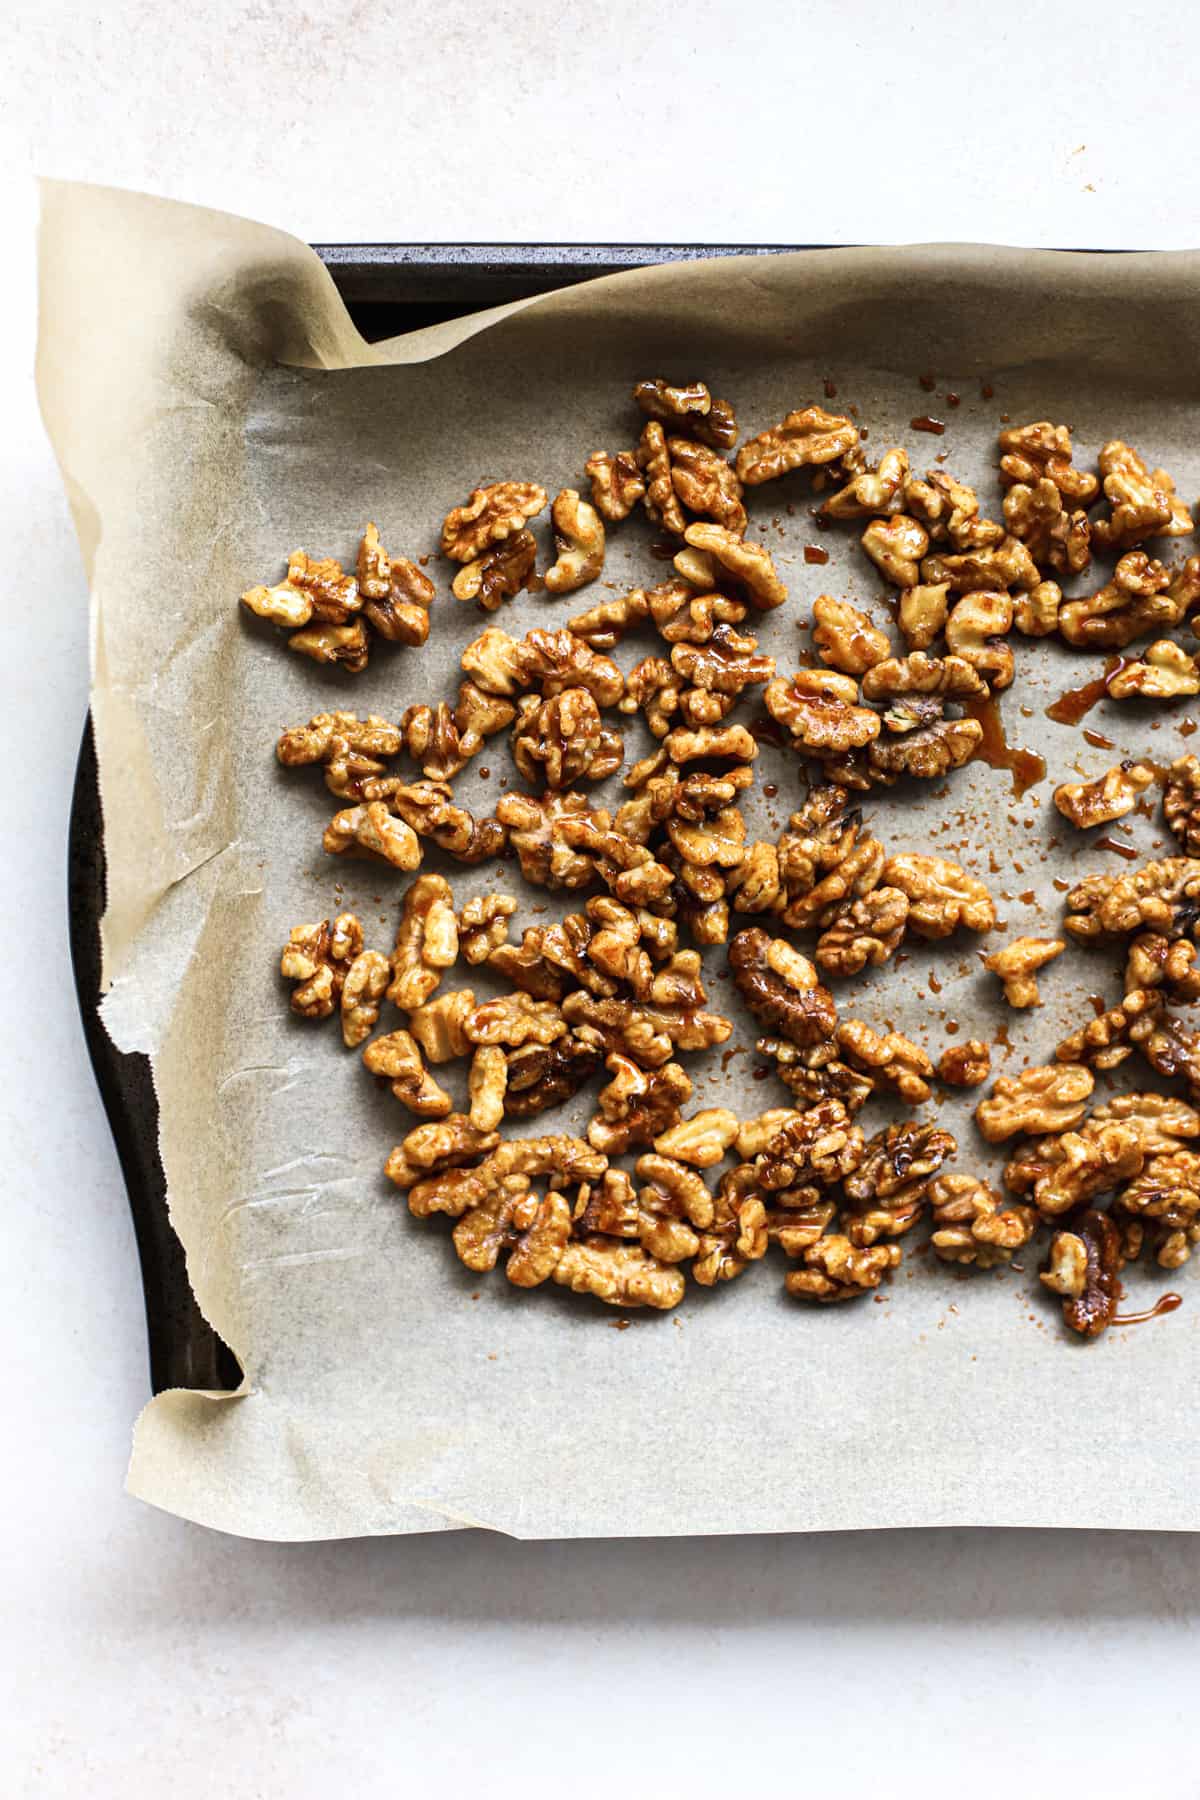 Maple cayenne coated walnuts spread out on parchment-lined baking sheet